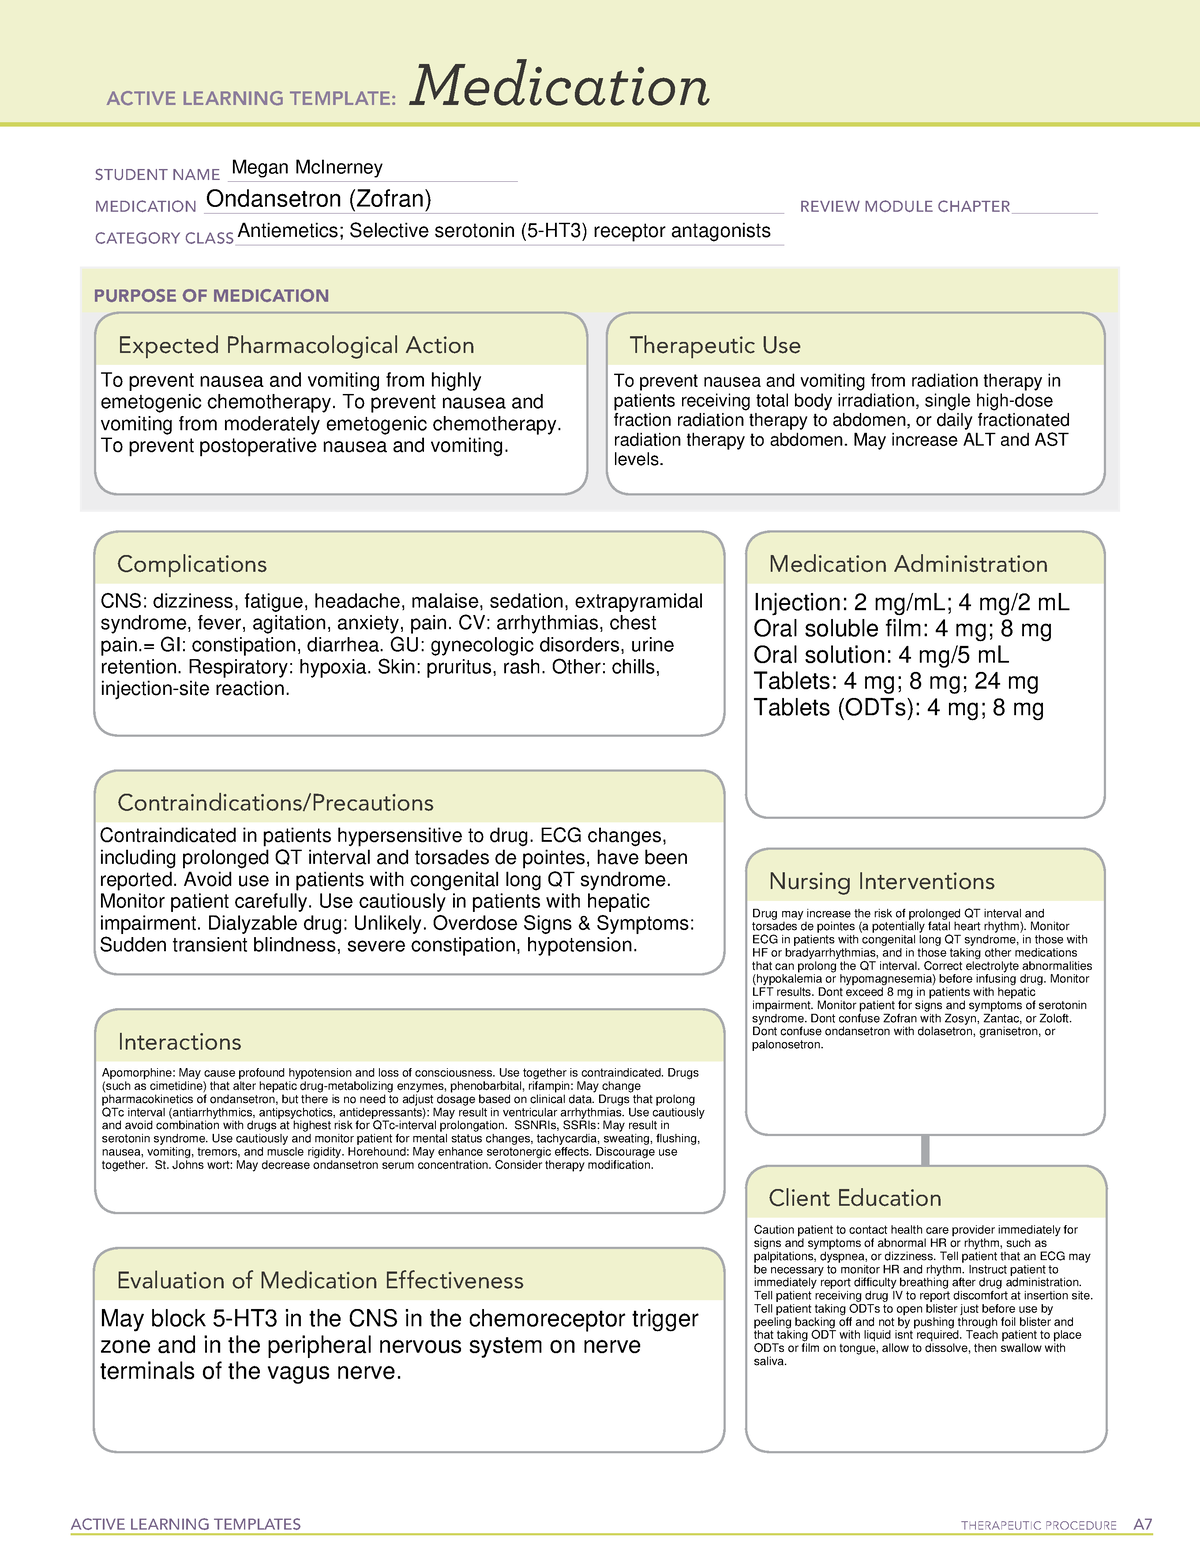 ondansetron-medication-active-learning-templates-therapeutic-procedure-a-medication-student